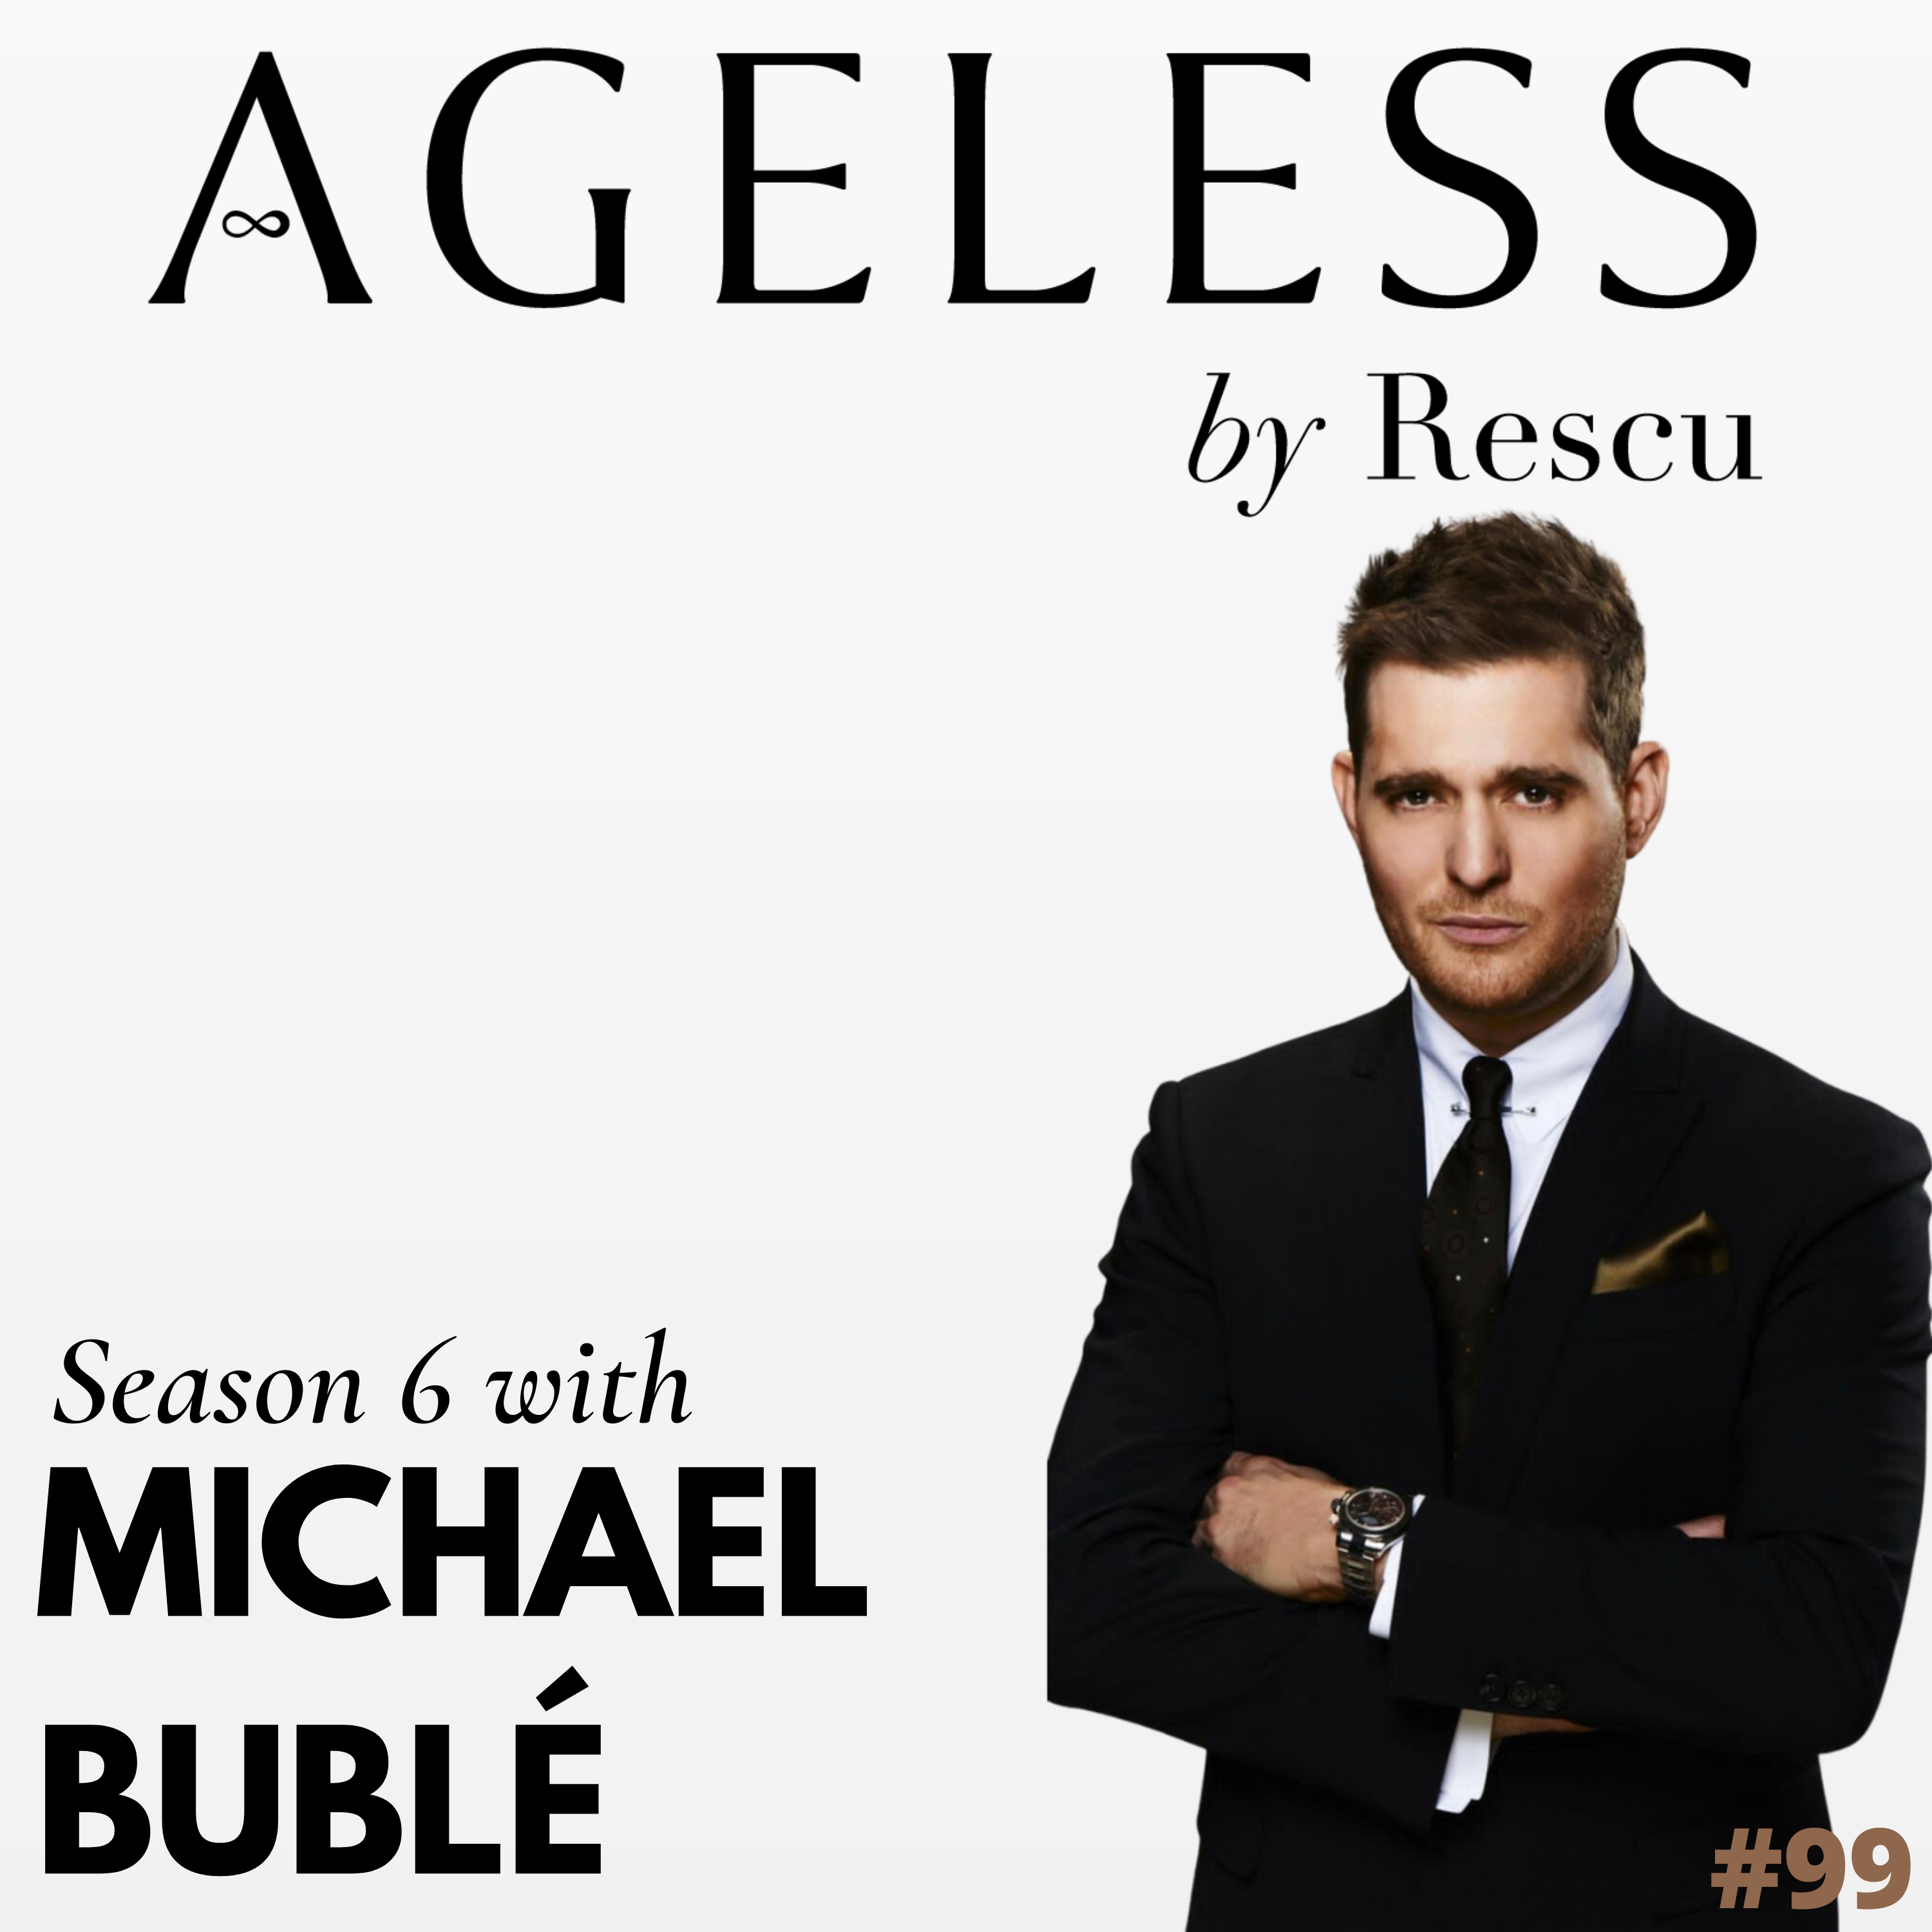 Michael Bublé | Musical Icon | Fragrance, Music, and Memories- How I Found My Voice